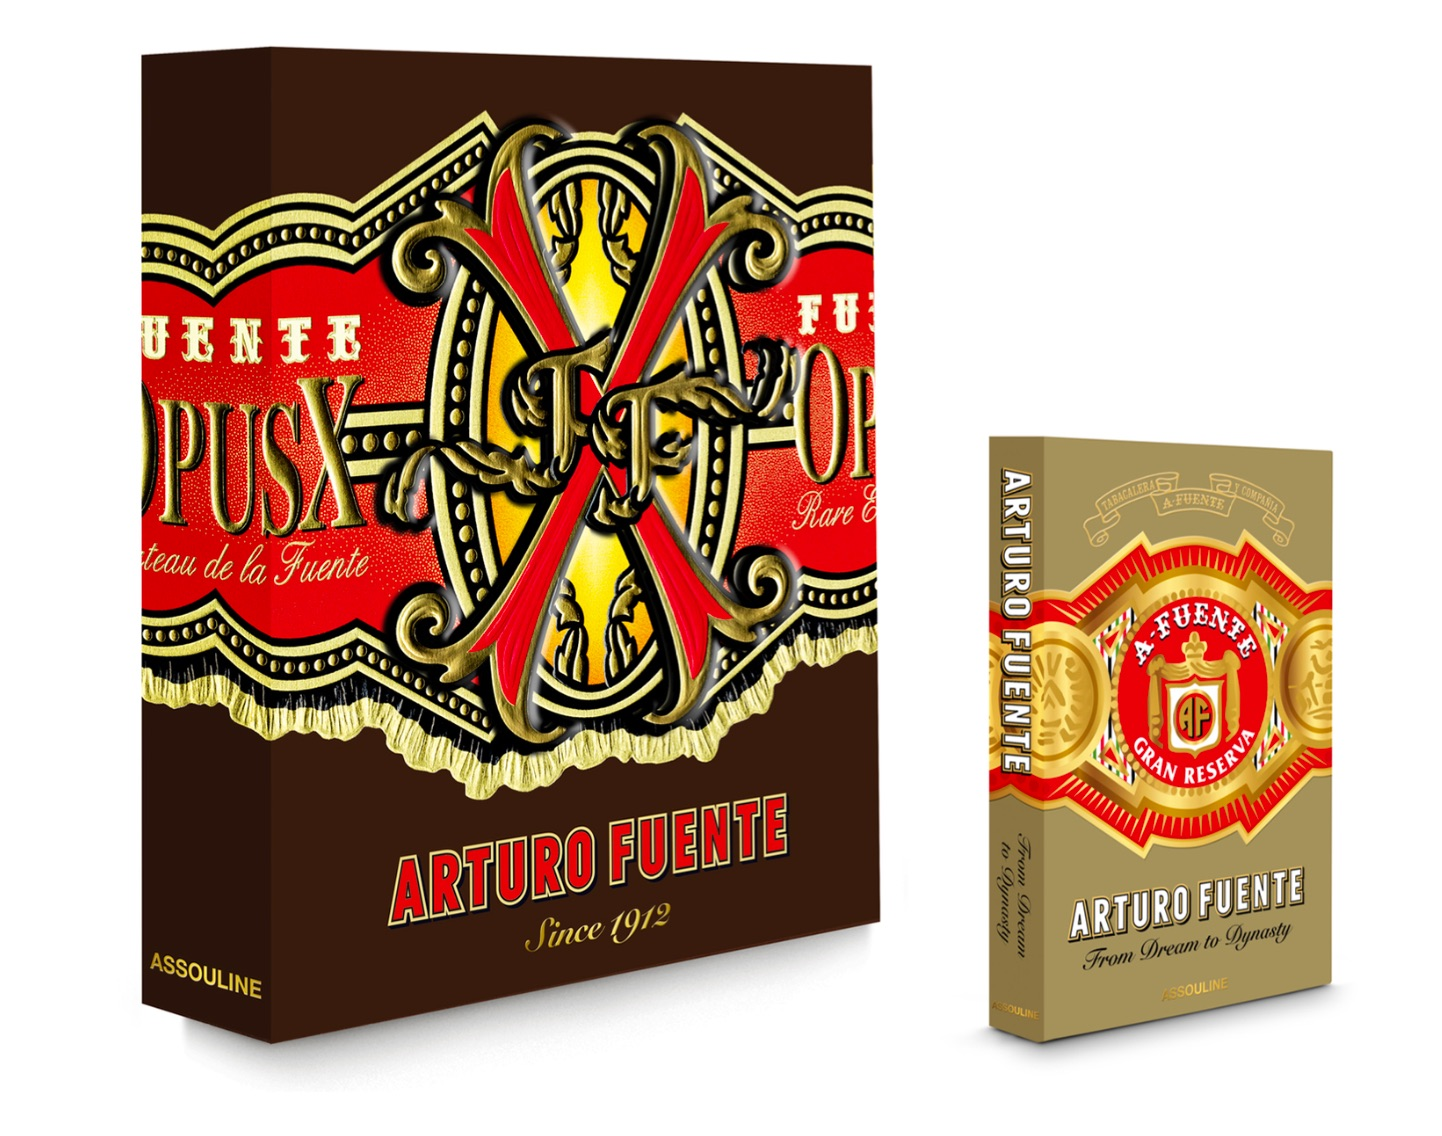 A picture of a fairly large book with the title "Arturo Fuente Since 1912"